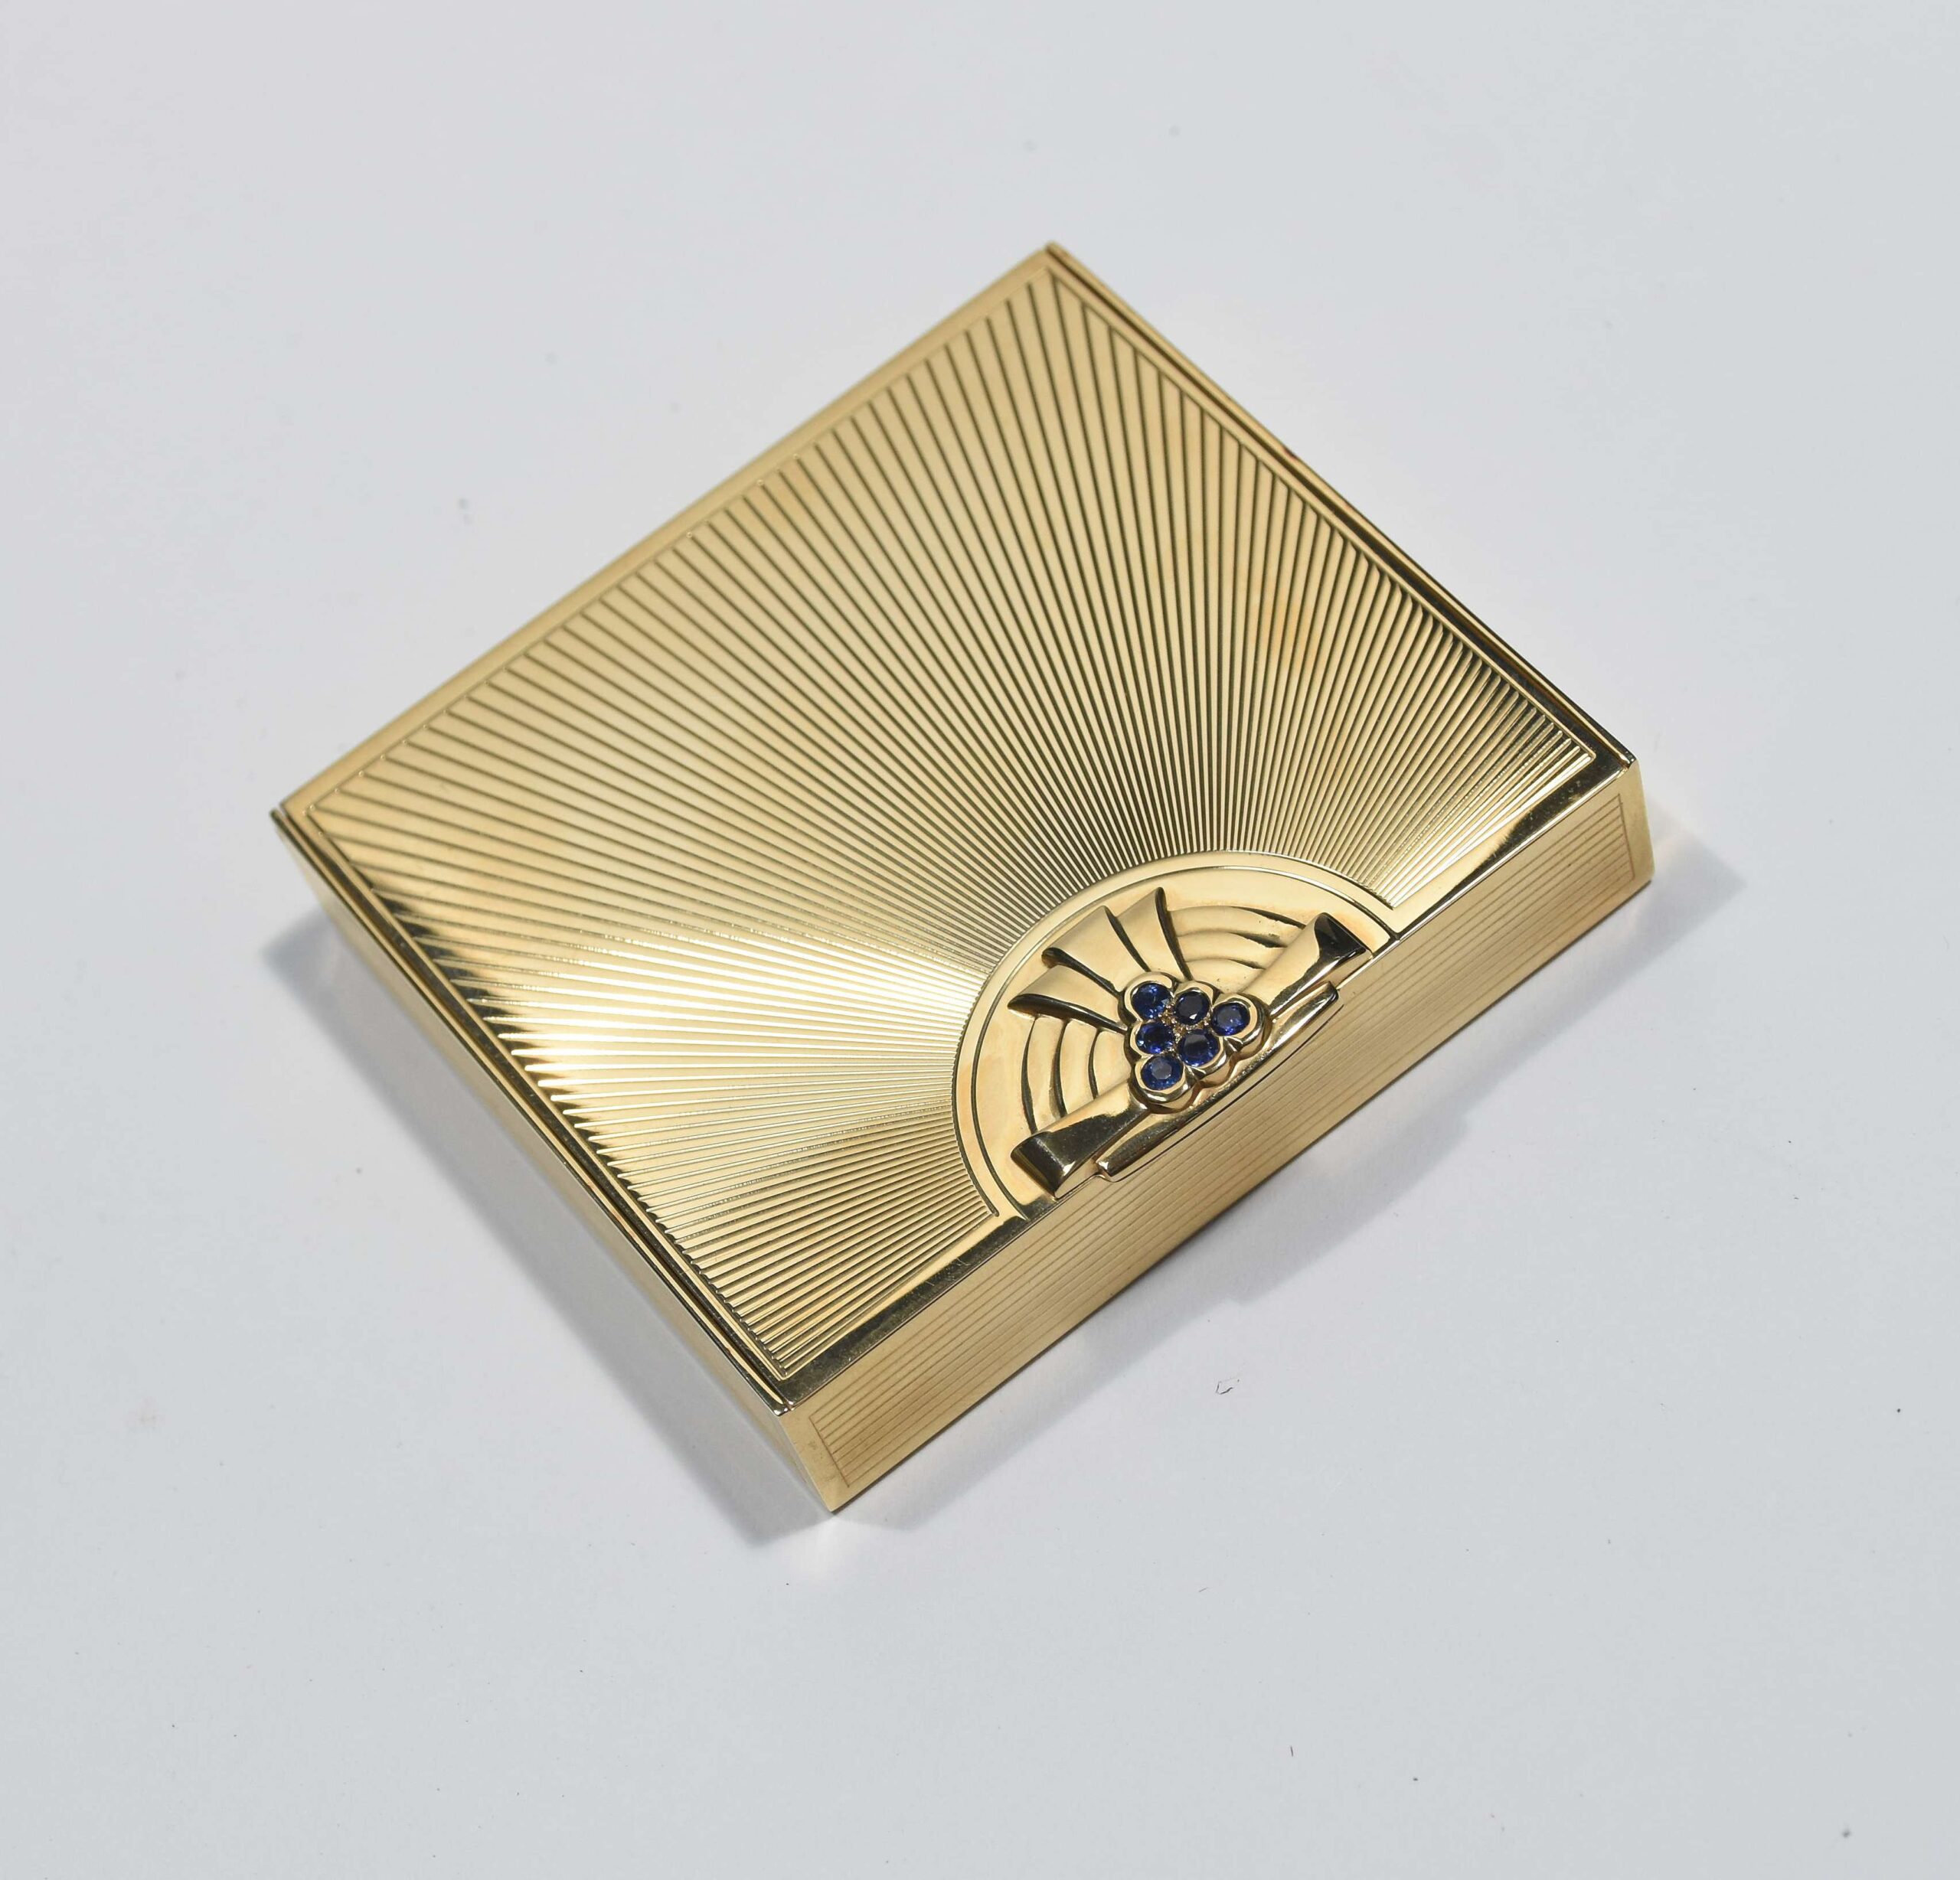 14K yellow gold cigarette case with engraved rayed lid